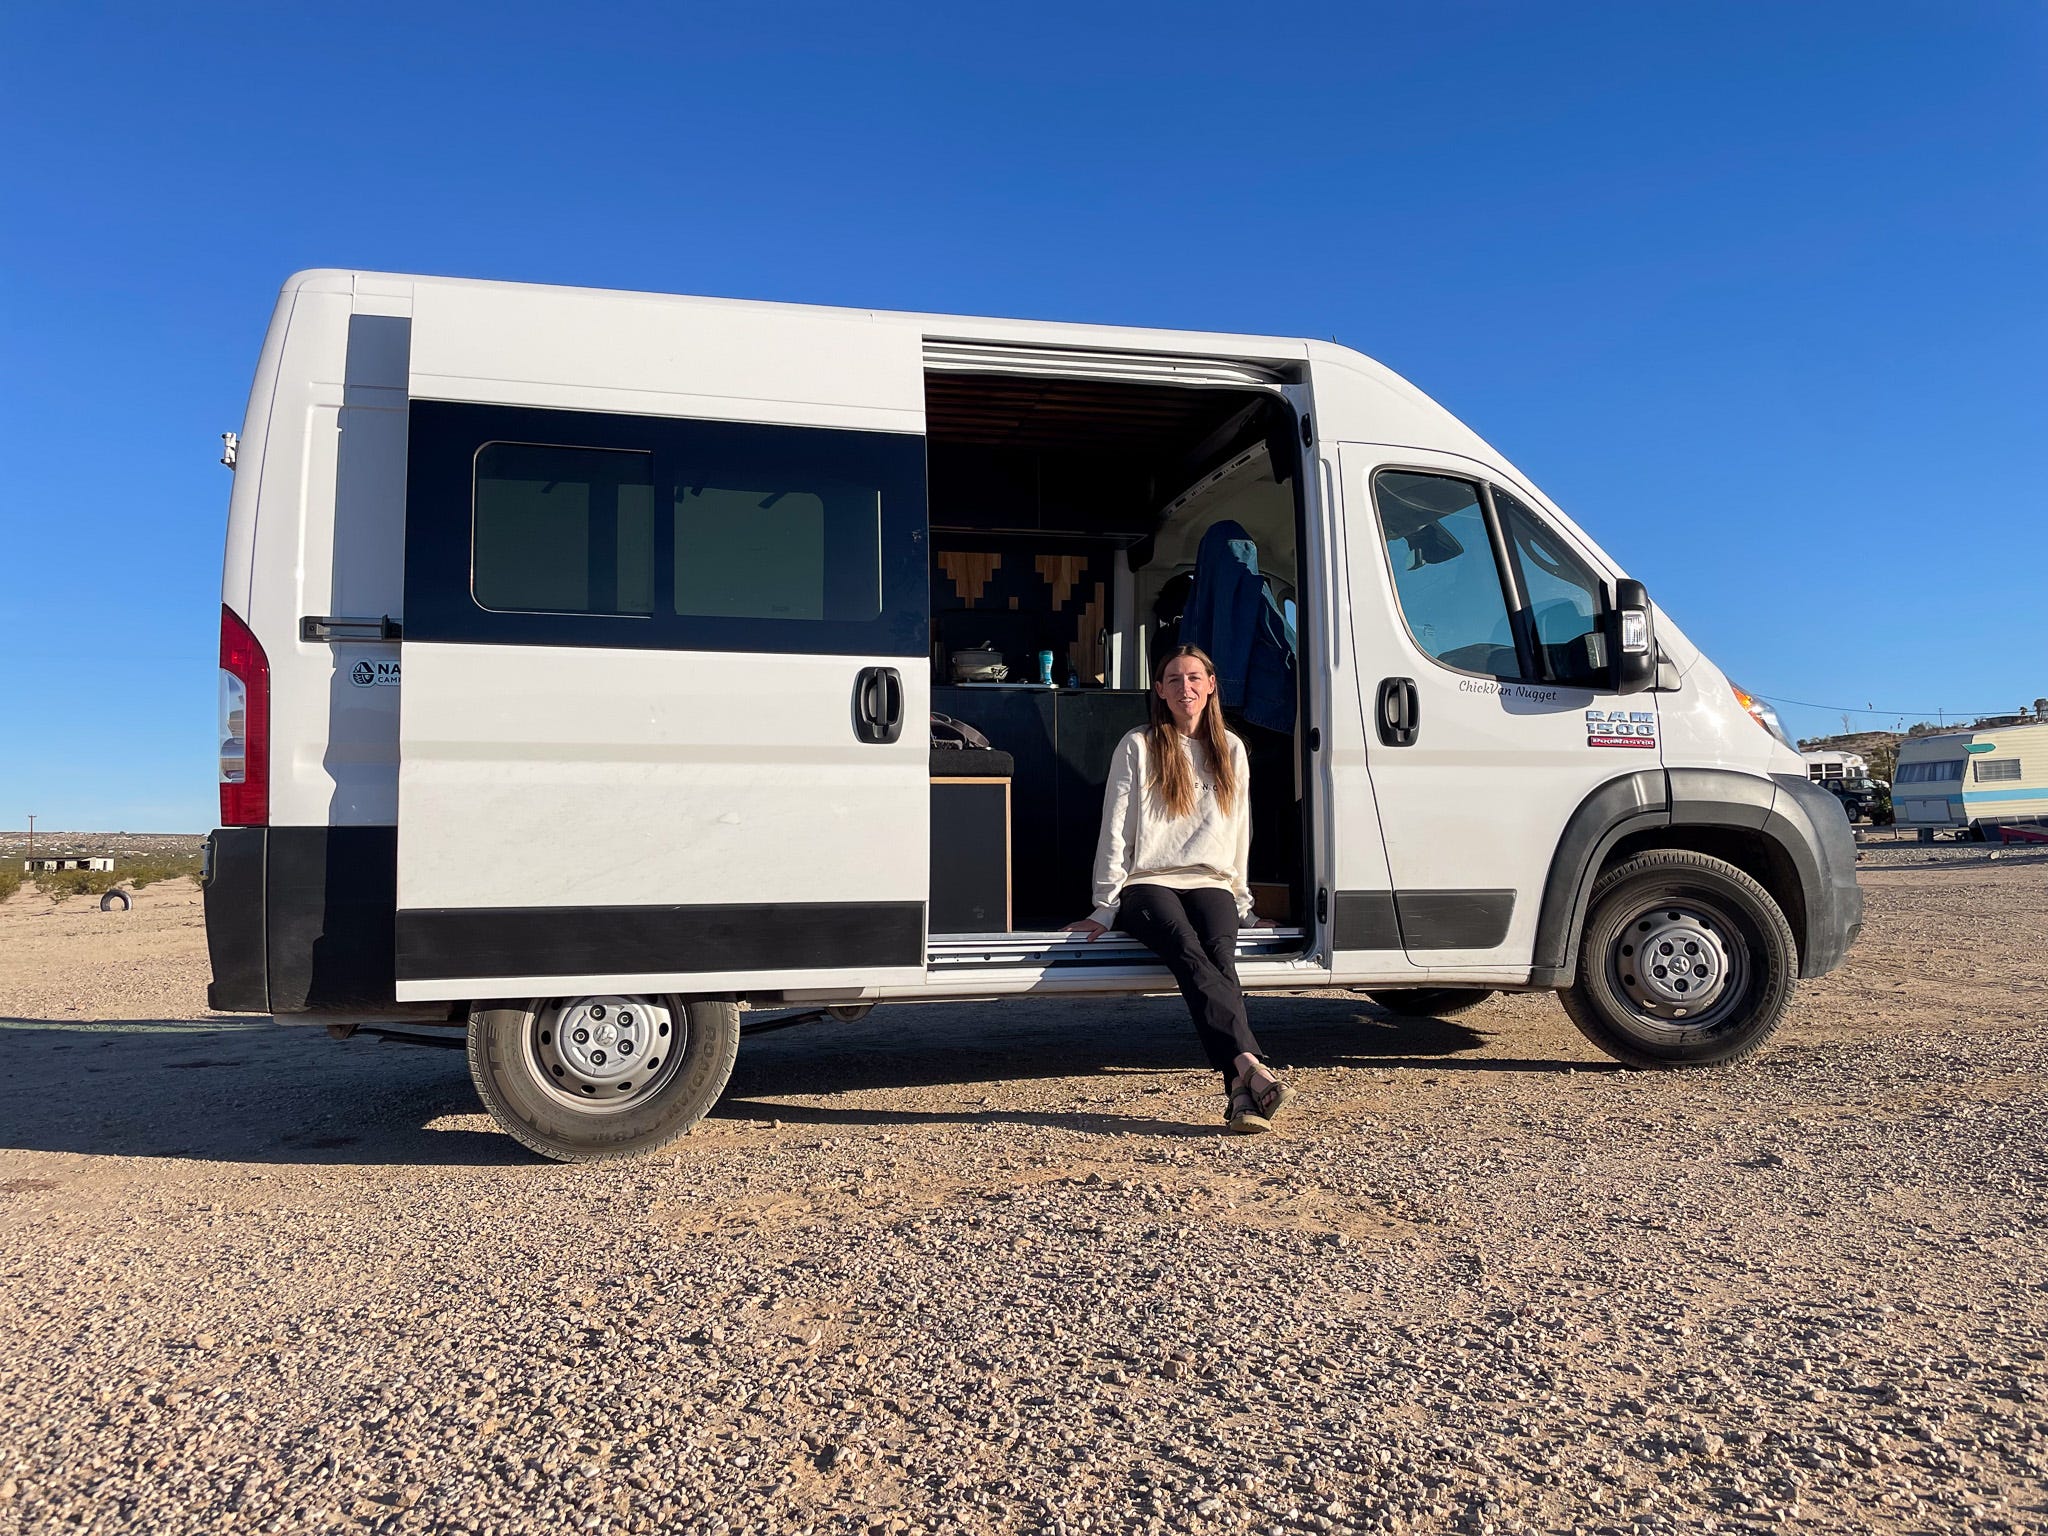 <p>Multiple people said that traveling in a van would mean needing to adapt to the weather.</p><p>"You have to understand whatever is going on outside will probably affect you on the inside," <a rel=" nofollow" href="https://www.instagram.com/whereis_brittany/">Brittany Newson</a>, a 36-year-old living in a travel trailer, told BI.</p><p>Whether it's rain, snow, or heat, everyone agreed I should pack with that in mind.</p><p><a rel=" nofollow" href="https://www.tiktok.com/@sierra.fernald">Sierra Fernald</a>, 23, said I shouldn't only consider the weather, but how I handle it. Fernald said she hates the cold and there were times in her Ram ProMaster van when it felt impossible to get out of her warm bed in the morning. So she invested in warmer clothes and a heater to make those chilly mornings easier.</p><p>"Definitely prepare for the weather, and maybe over-prepare a little bit," she said.</p>